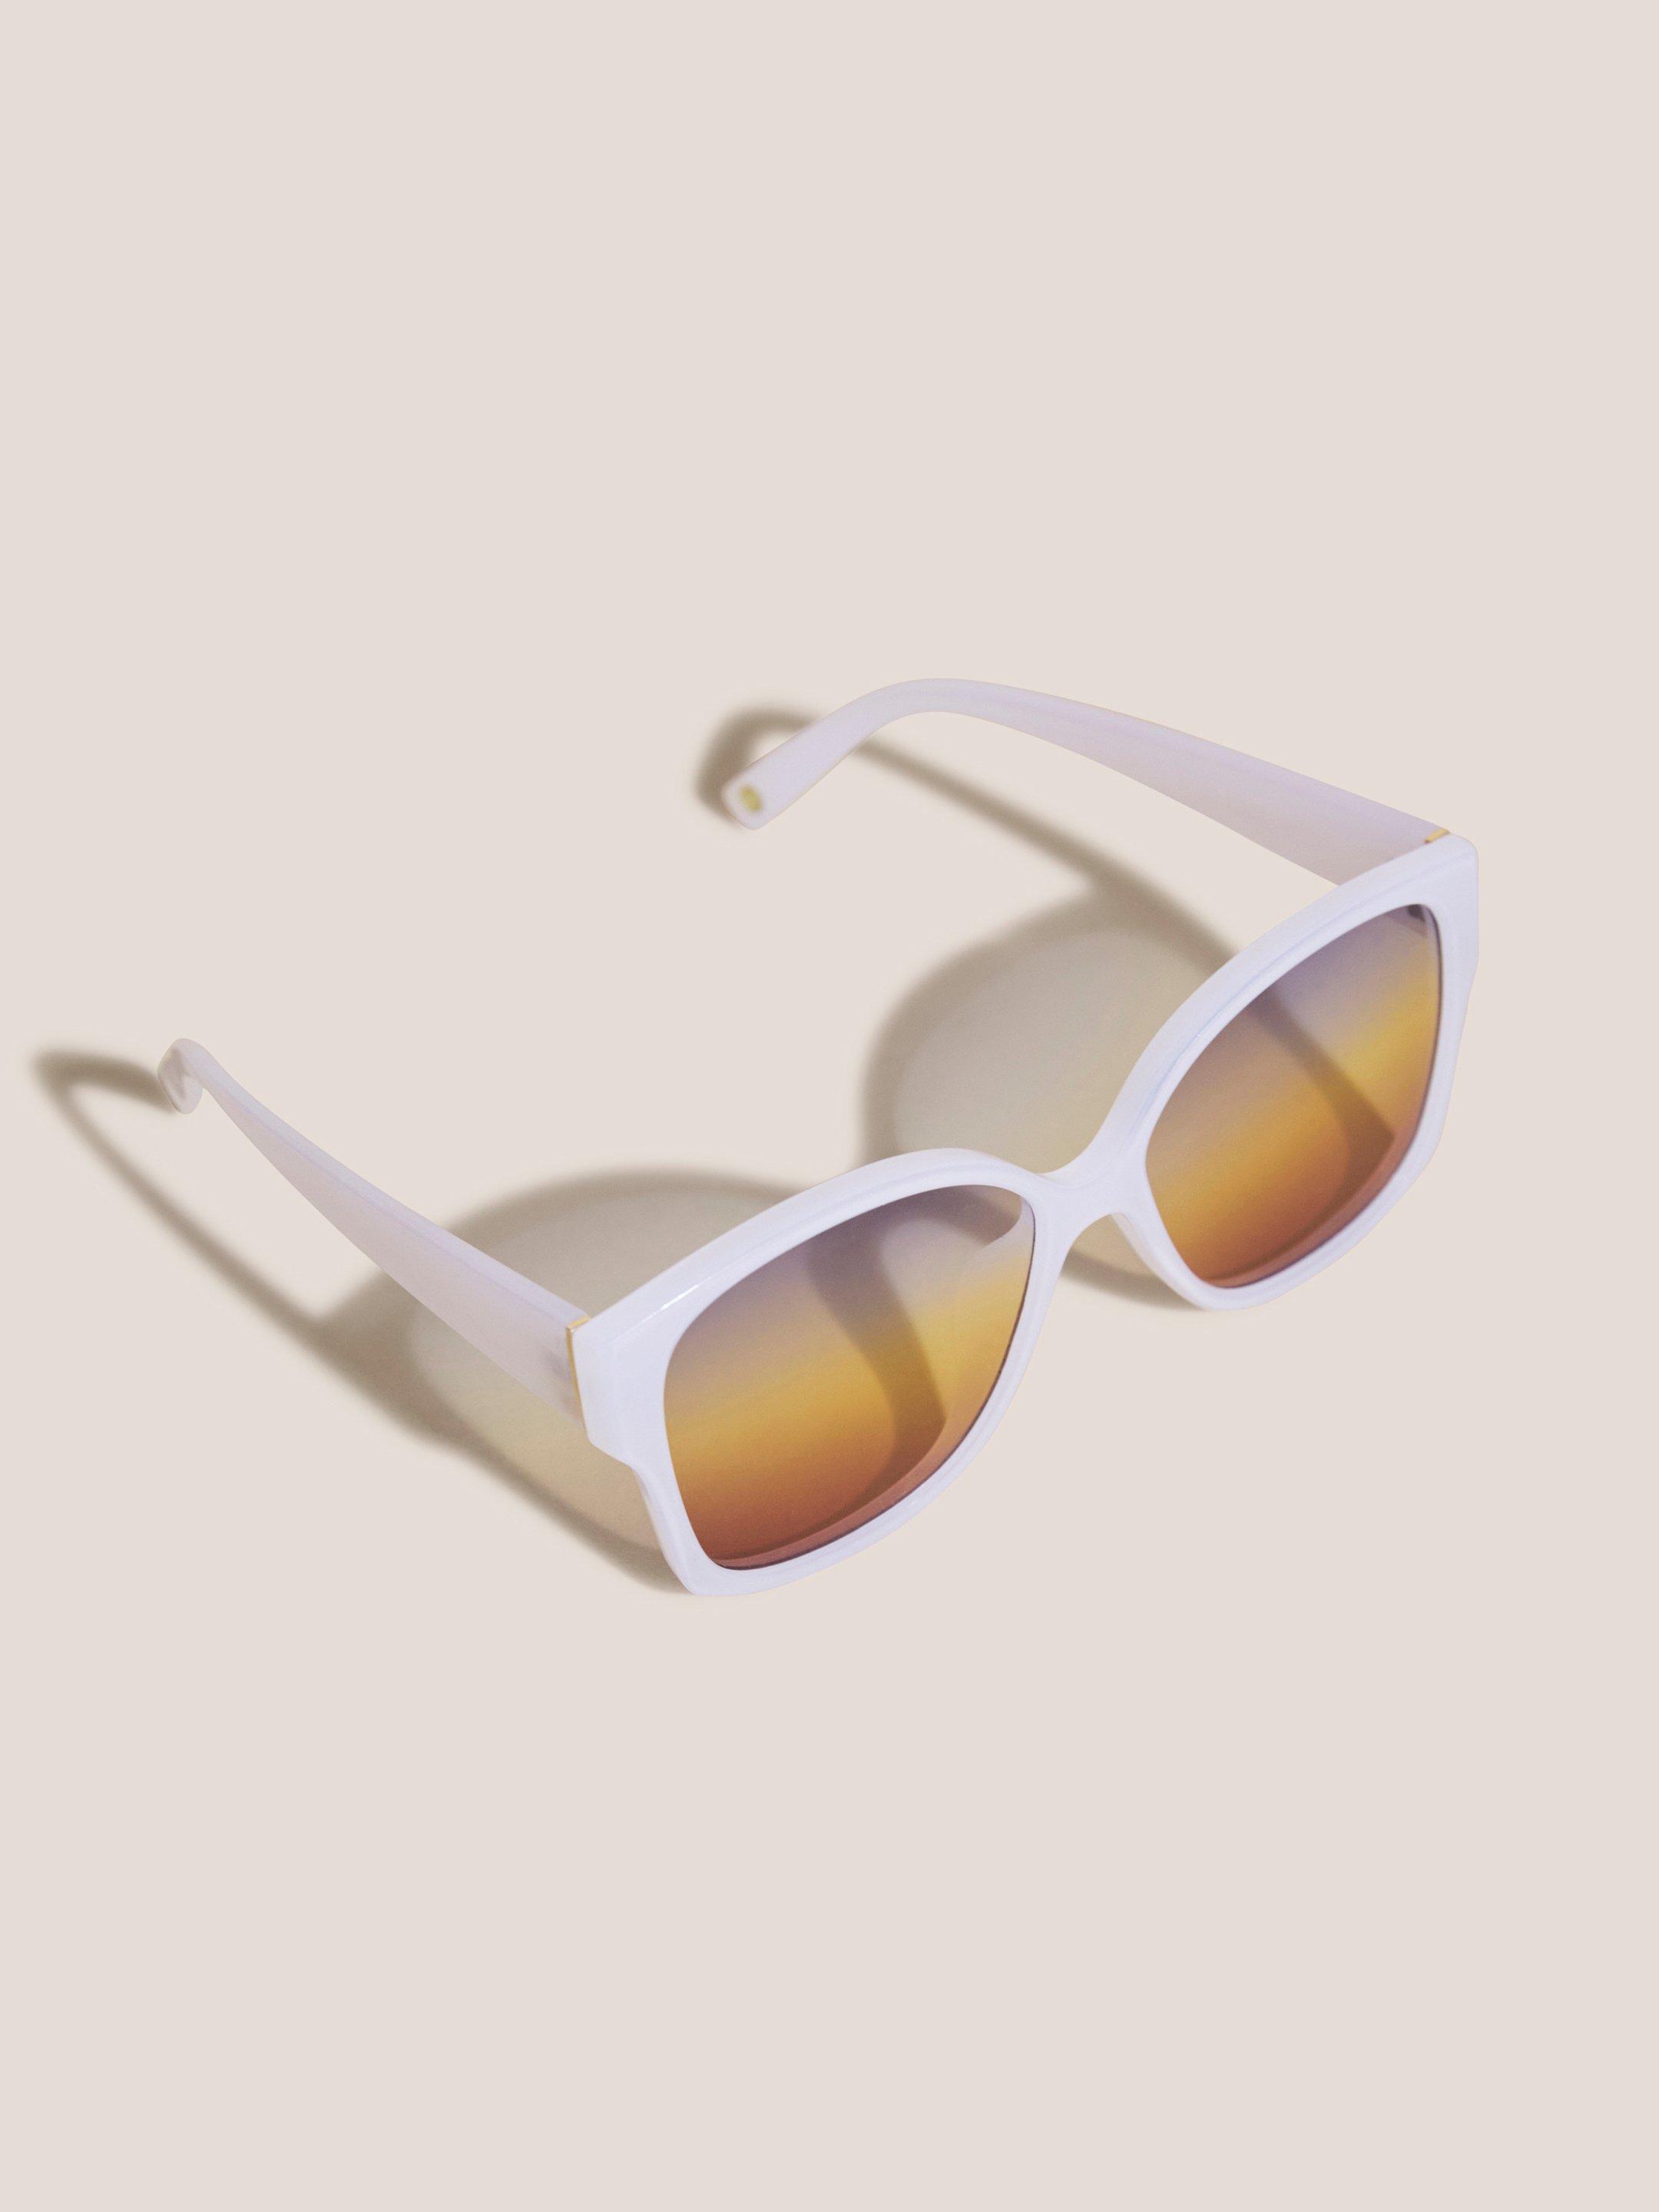 Angled Cateye Sunglasses in PALE IVORY - FLAT DETAIL